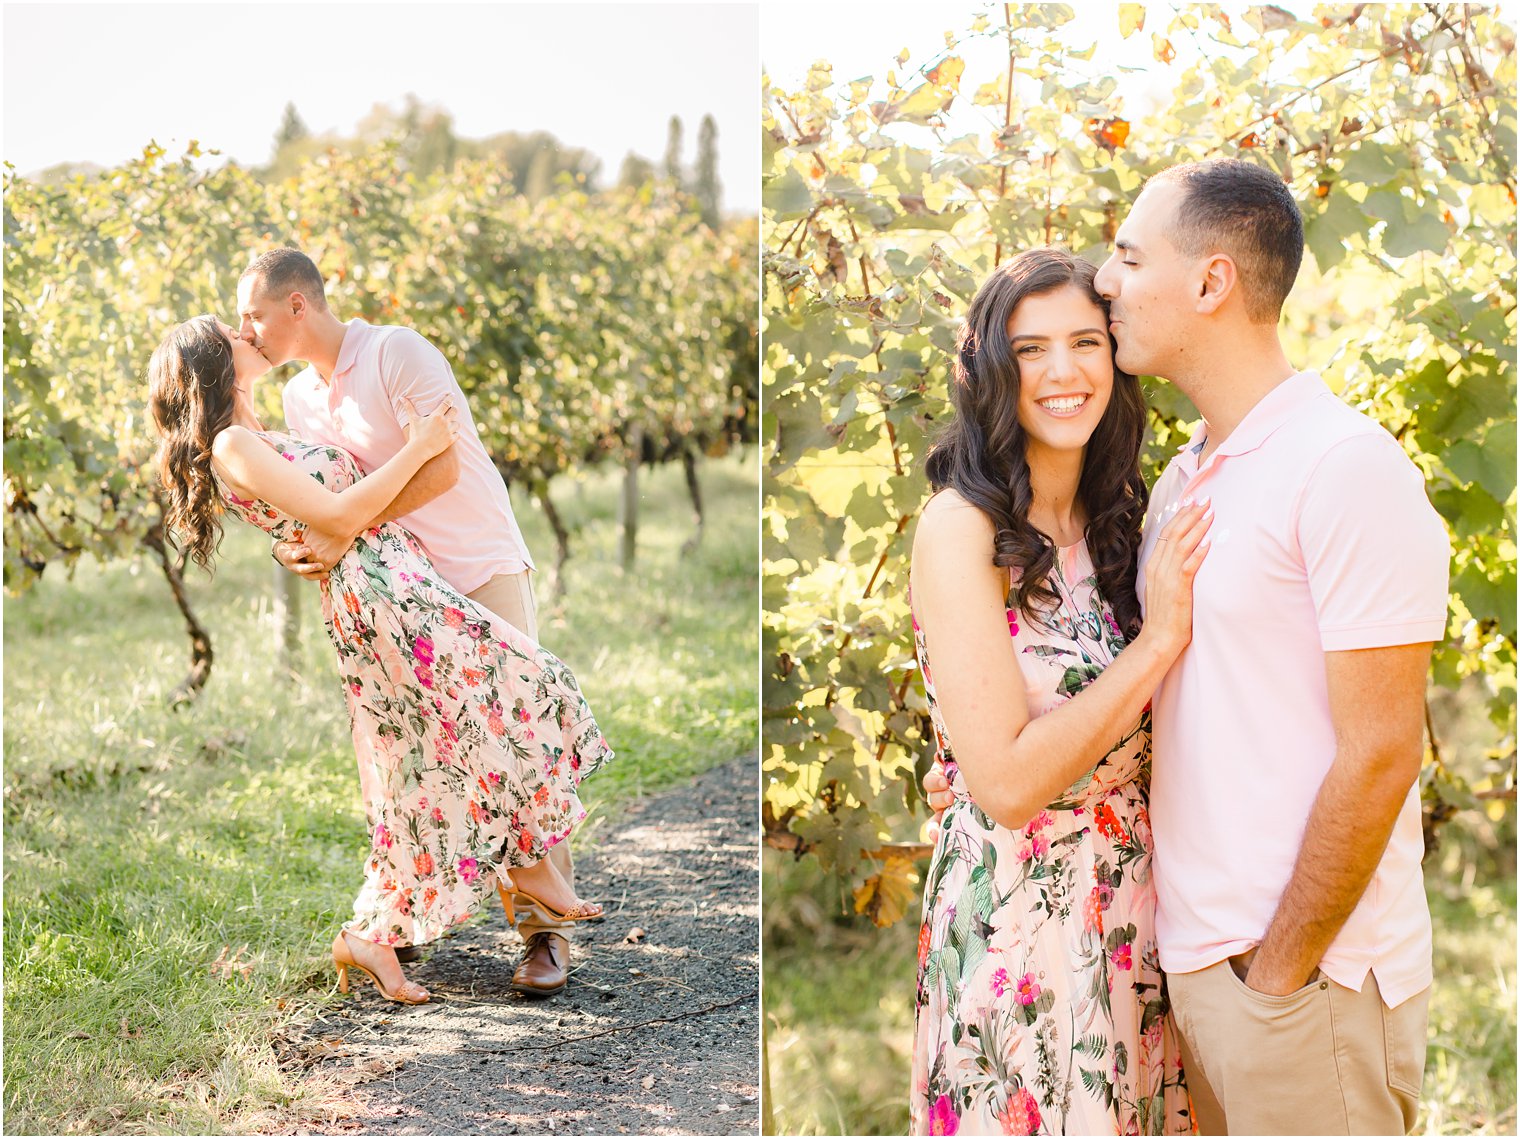 Early fall engagement session in Cape May